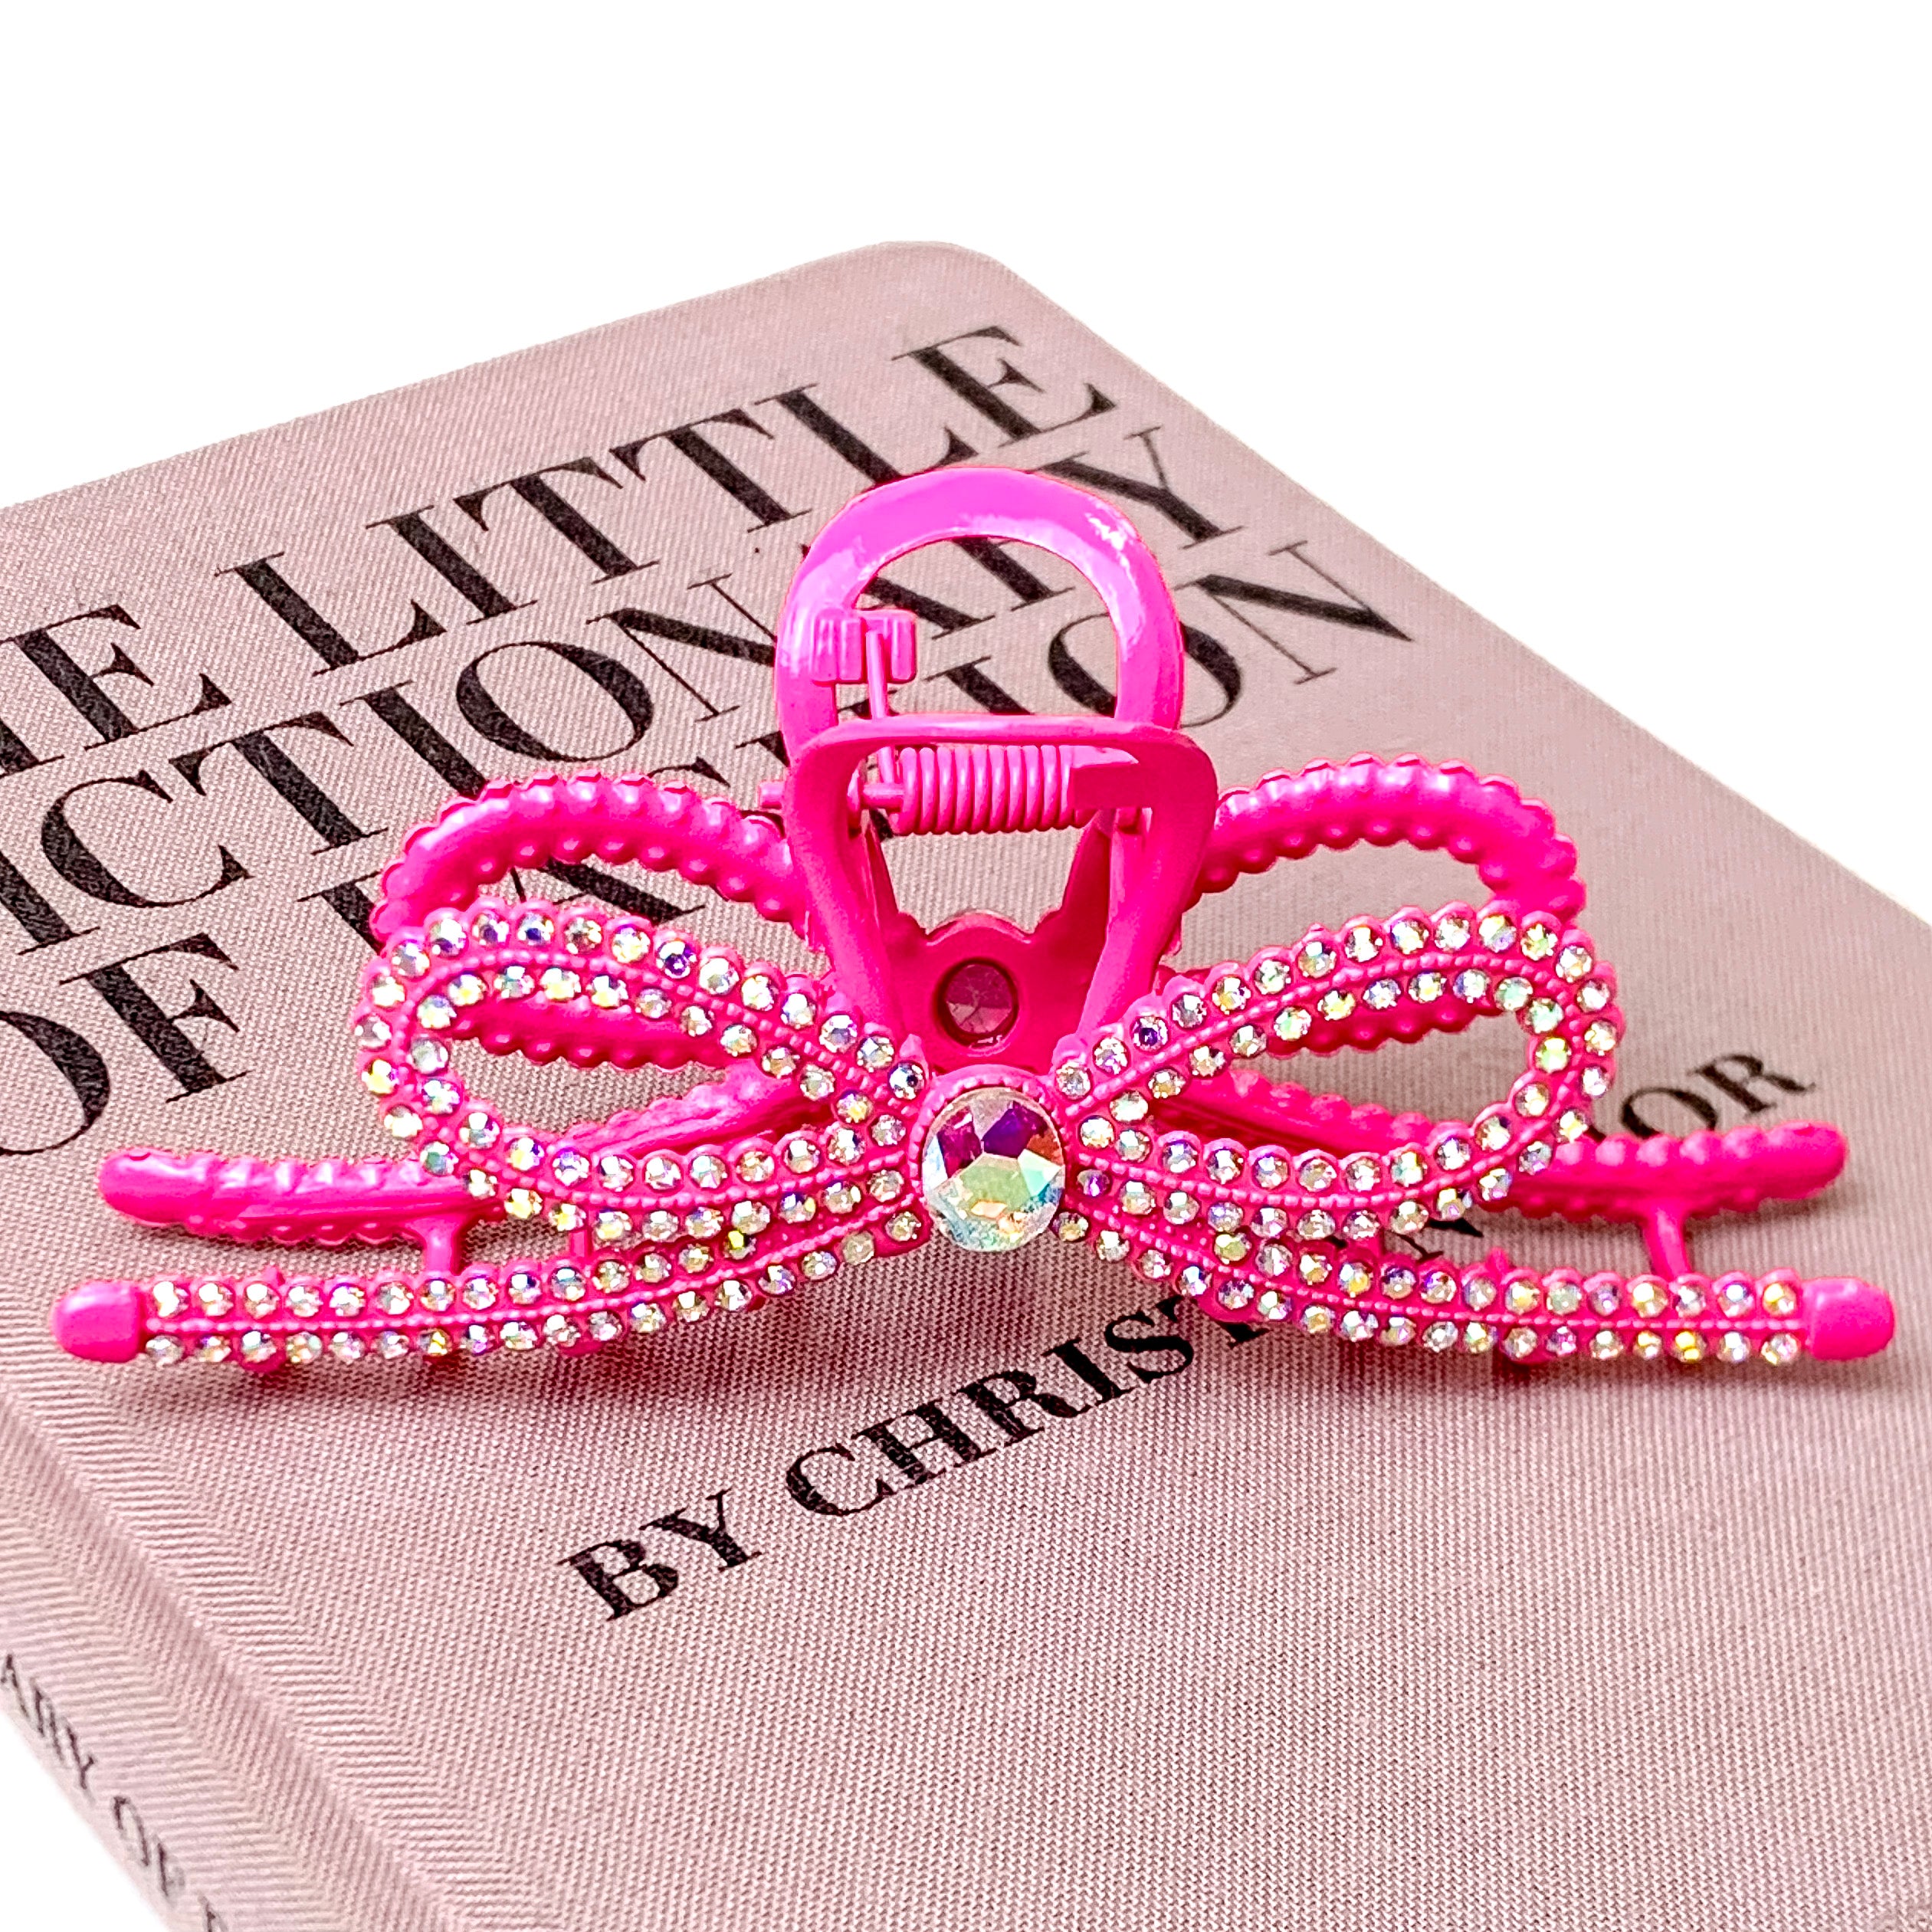 AB Crystal Embellished Ribbon Shaped Metal Hair Clip in Fuchsia Pink - Giddy Up Glamour Boutique